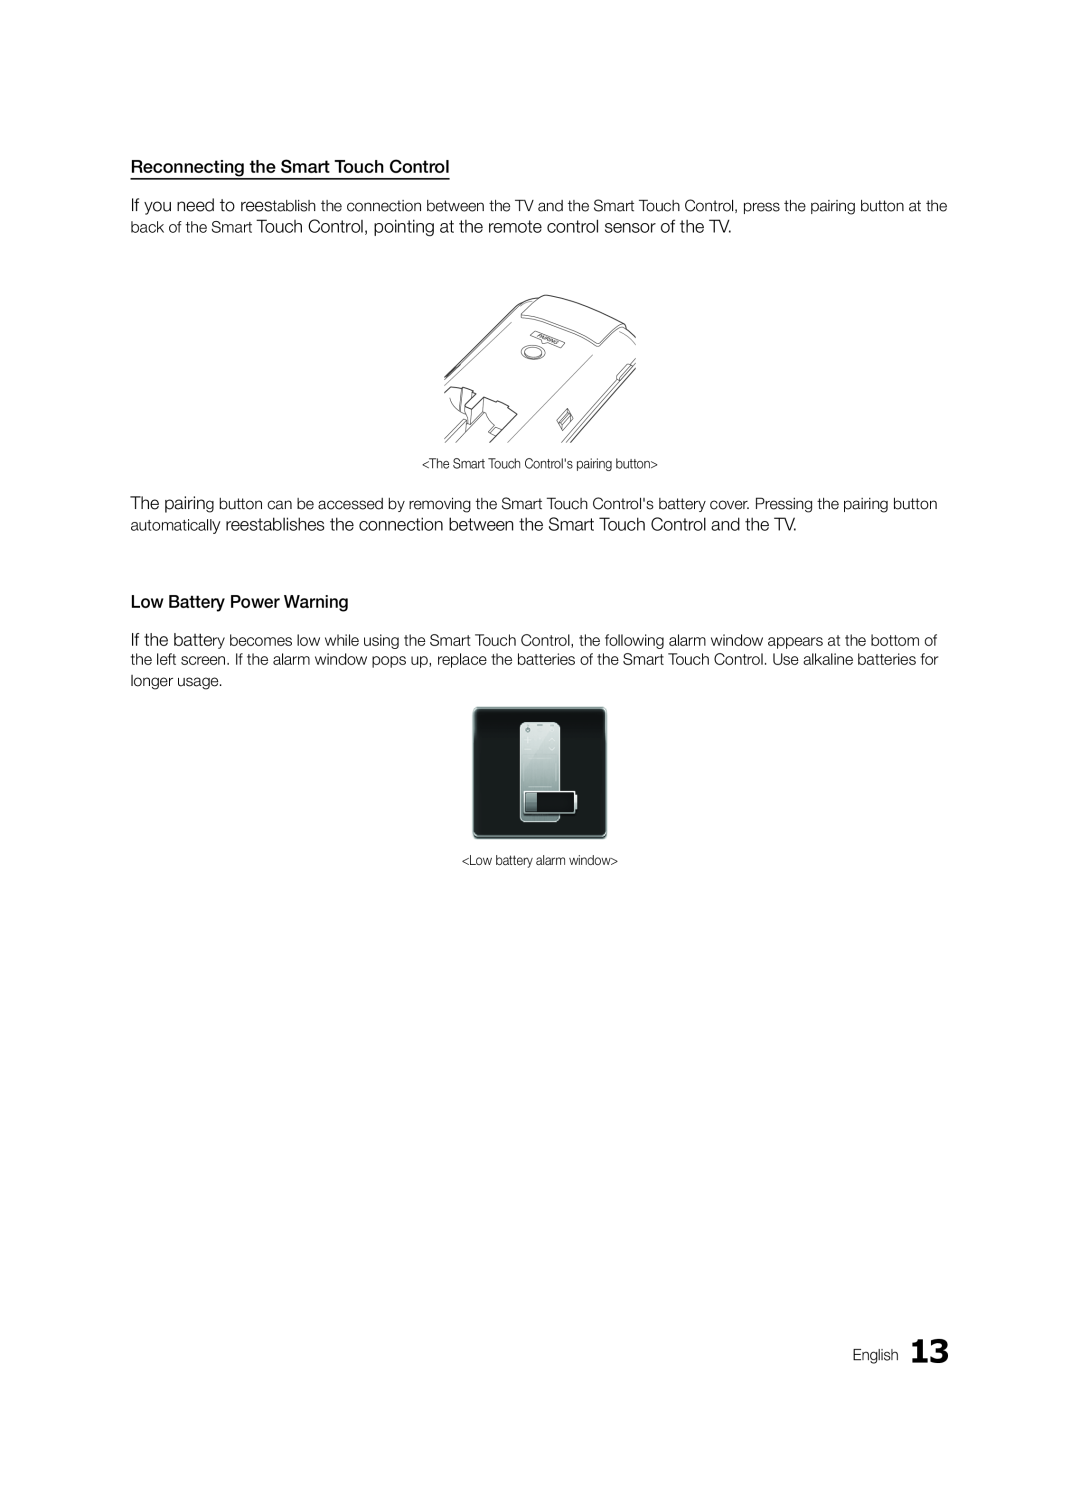 Samsung HG46NB890XFXZA, HG65NB890XFXZA installation manual Reconnecting the Smart Touch Control, Low Battery Power Warning 